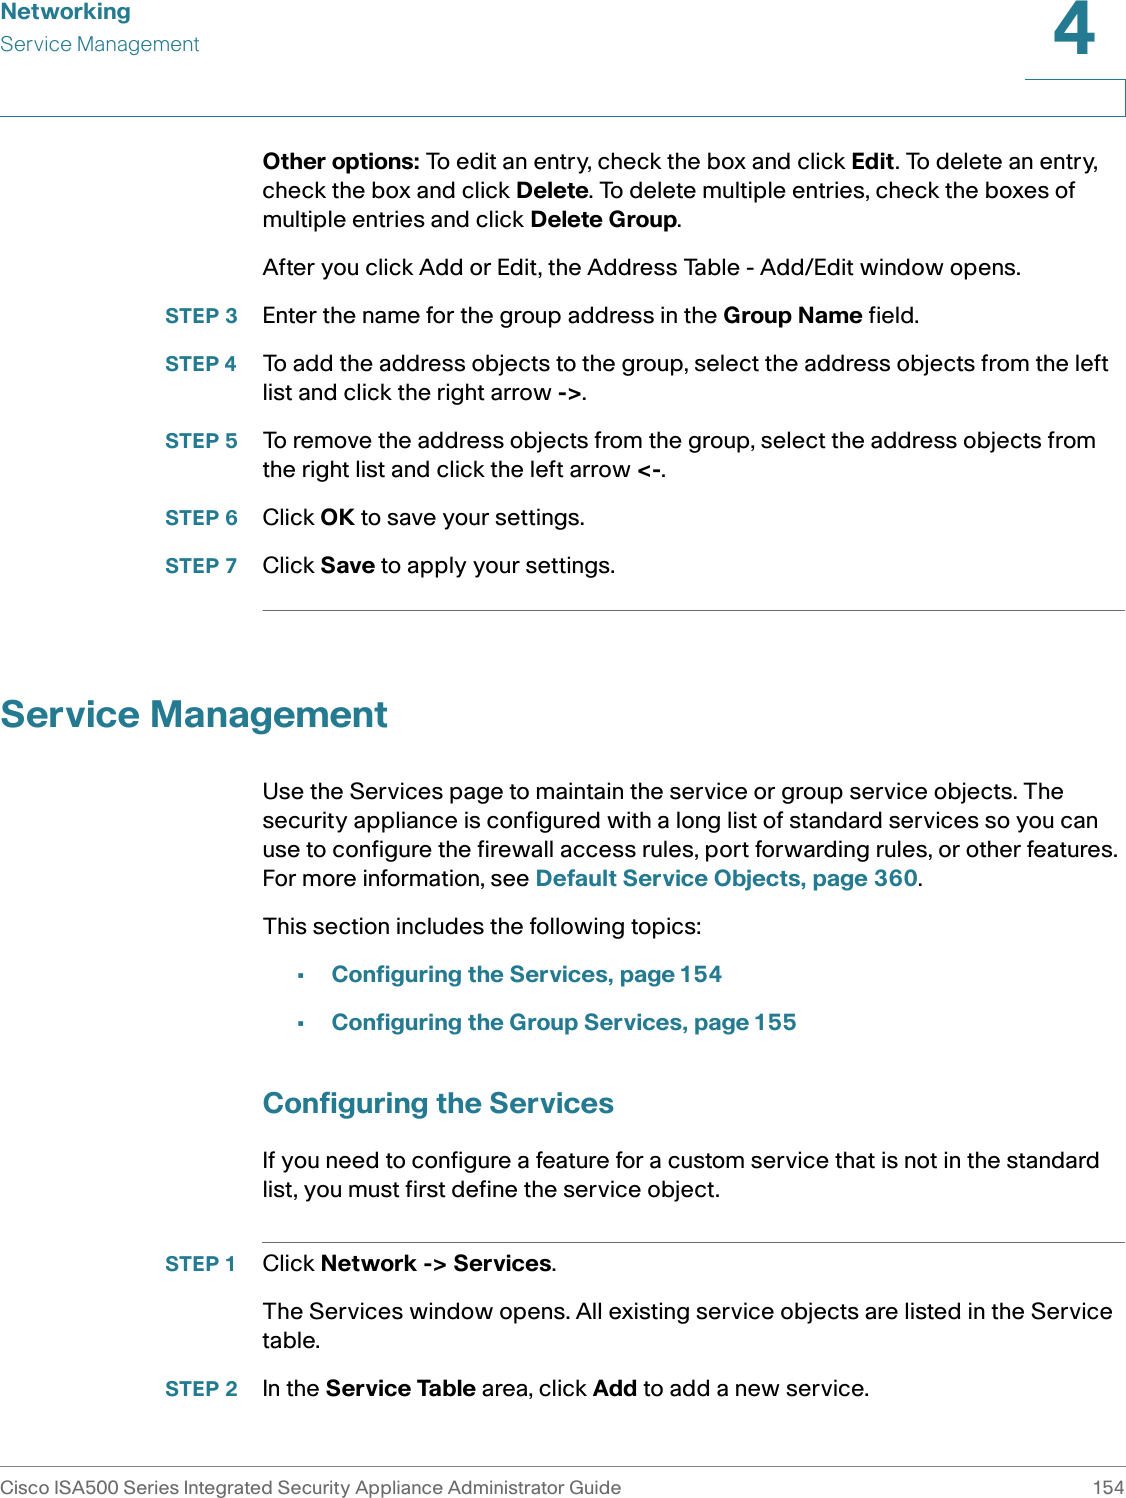 NetworkingService ManagementCisco ISA500 Series Integrated Security Appliance Administrator Guide 1544 Other options: To edit an entry, check the box and click Edit. To delete an entry, check the box and click Delete. To delete multiple entries, check the boxes of multiple entries and click Delete Group. After you click Add or Edit, the Address Table - Add/Edit window opens.STEP 3 Enter the name for the group address in the Group Name field.STEP 4 To add the address objects to the group, select the address objects from the left list and click the right arrow -&gt;. STEP 5 To remove the address objects from the group, select the address objects from the right list and click the left arrow &lt;-. STEP 6 Click OK to save your settings.STEP 7 Click Save to apply your settings.Service ManagementUse the Services page to maintain the service or group service objects. The security appliance is configured with a long list of standard services so you can use to configure the firewall access rules, port forwarding rules, or other features. For more information, see Default Service Objects, page 360. This section includes the following topics: •Configuring the Services, page 154•Configuring the Group Services, page 155Configuring the ServicesIf you need to configure a feature for a custom service that is not in the standard list, you must first define the service object. STEP 1 Click Network -&gt; Services. The Services window opens. All existing service objects are listed in the Service table. STEP 2 In the Service Table area, click Add to add a new service.